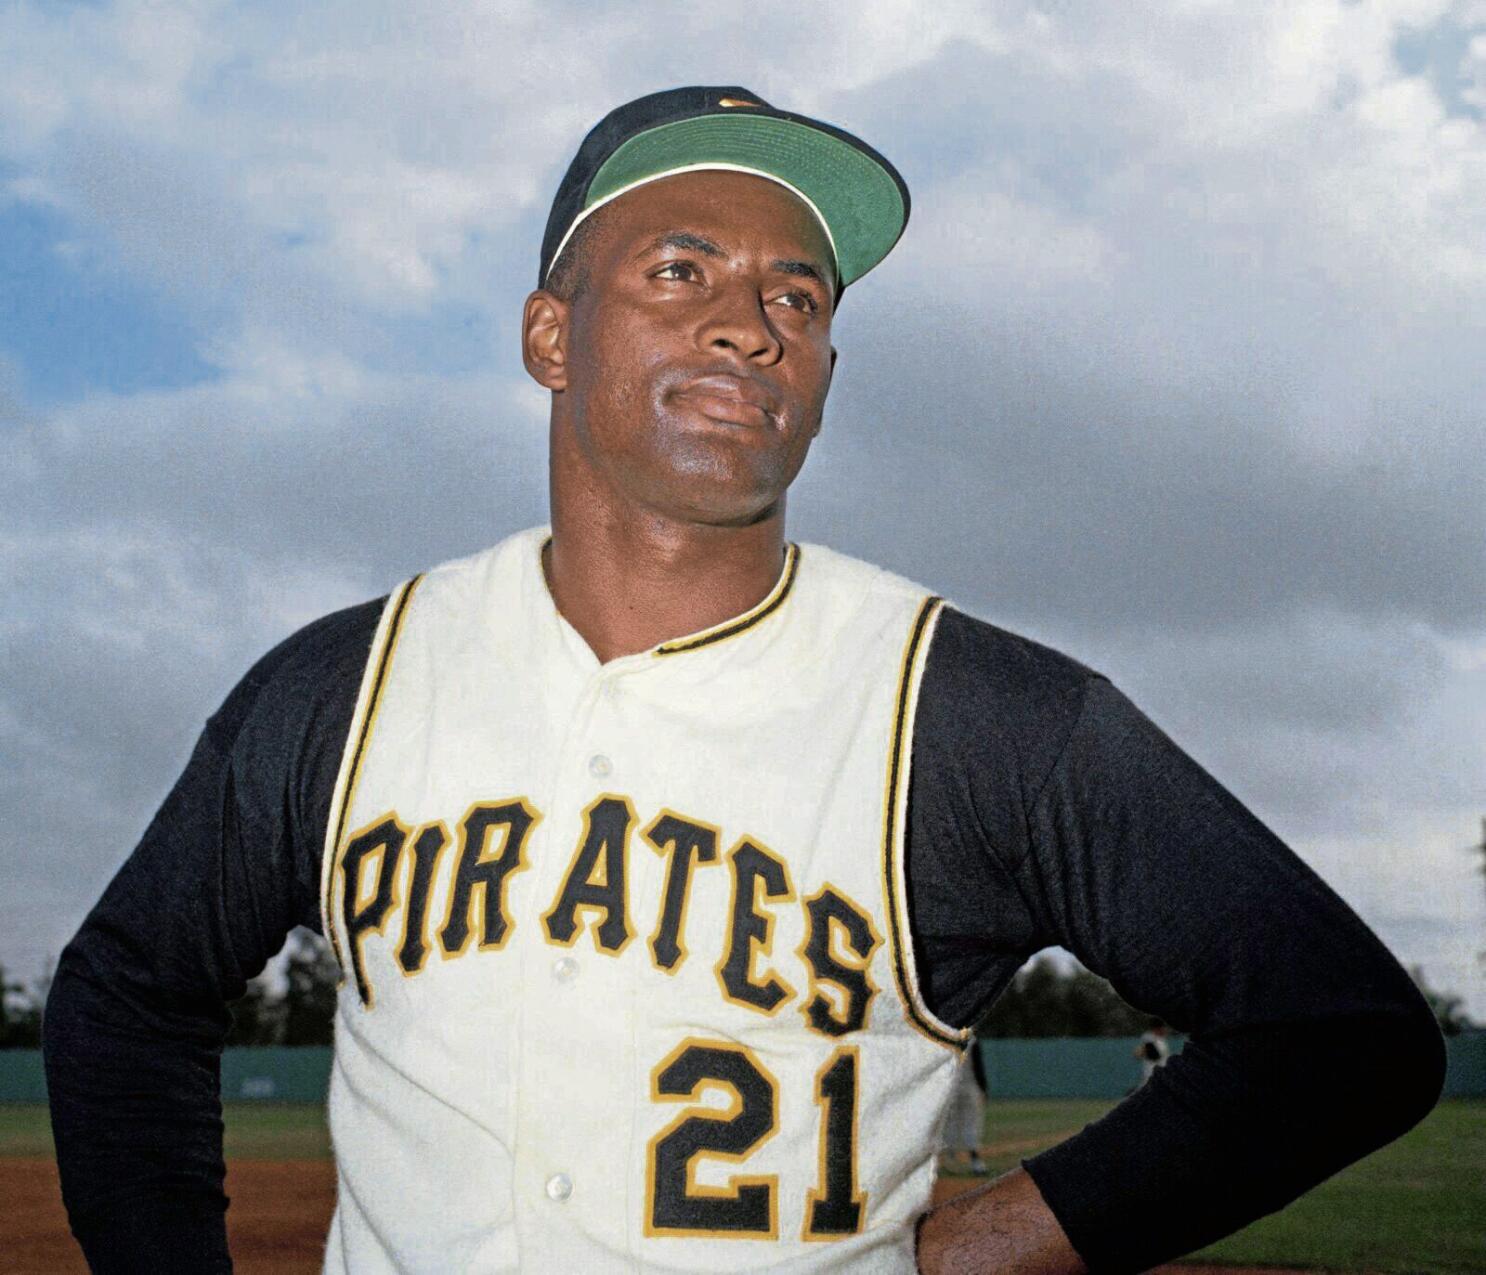 Pirates to wear No. 21 on Sept. 9 to honor Roberto Clemente - The